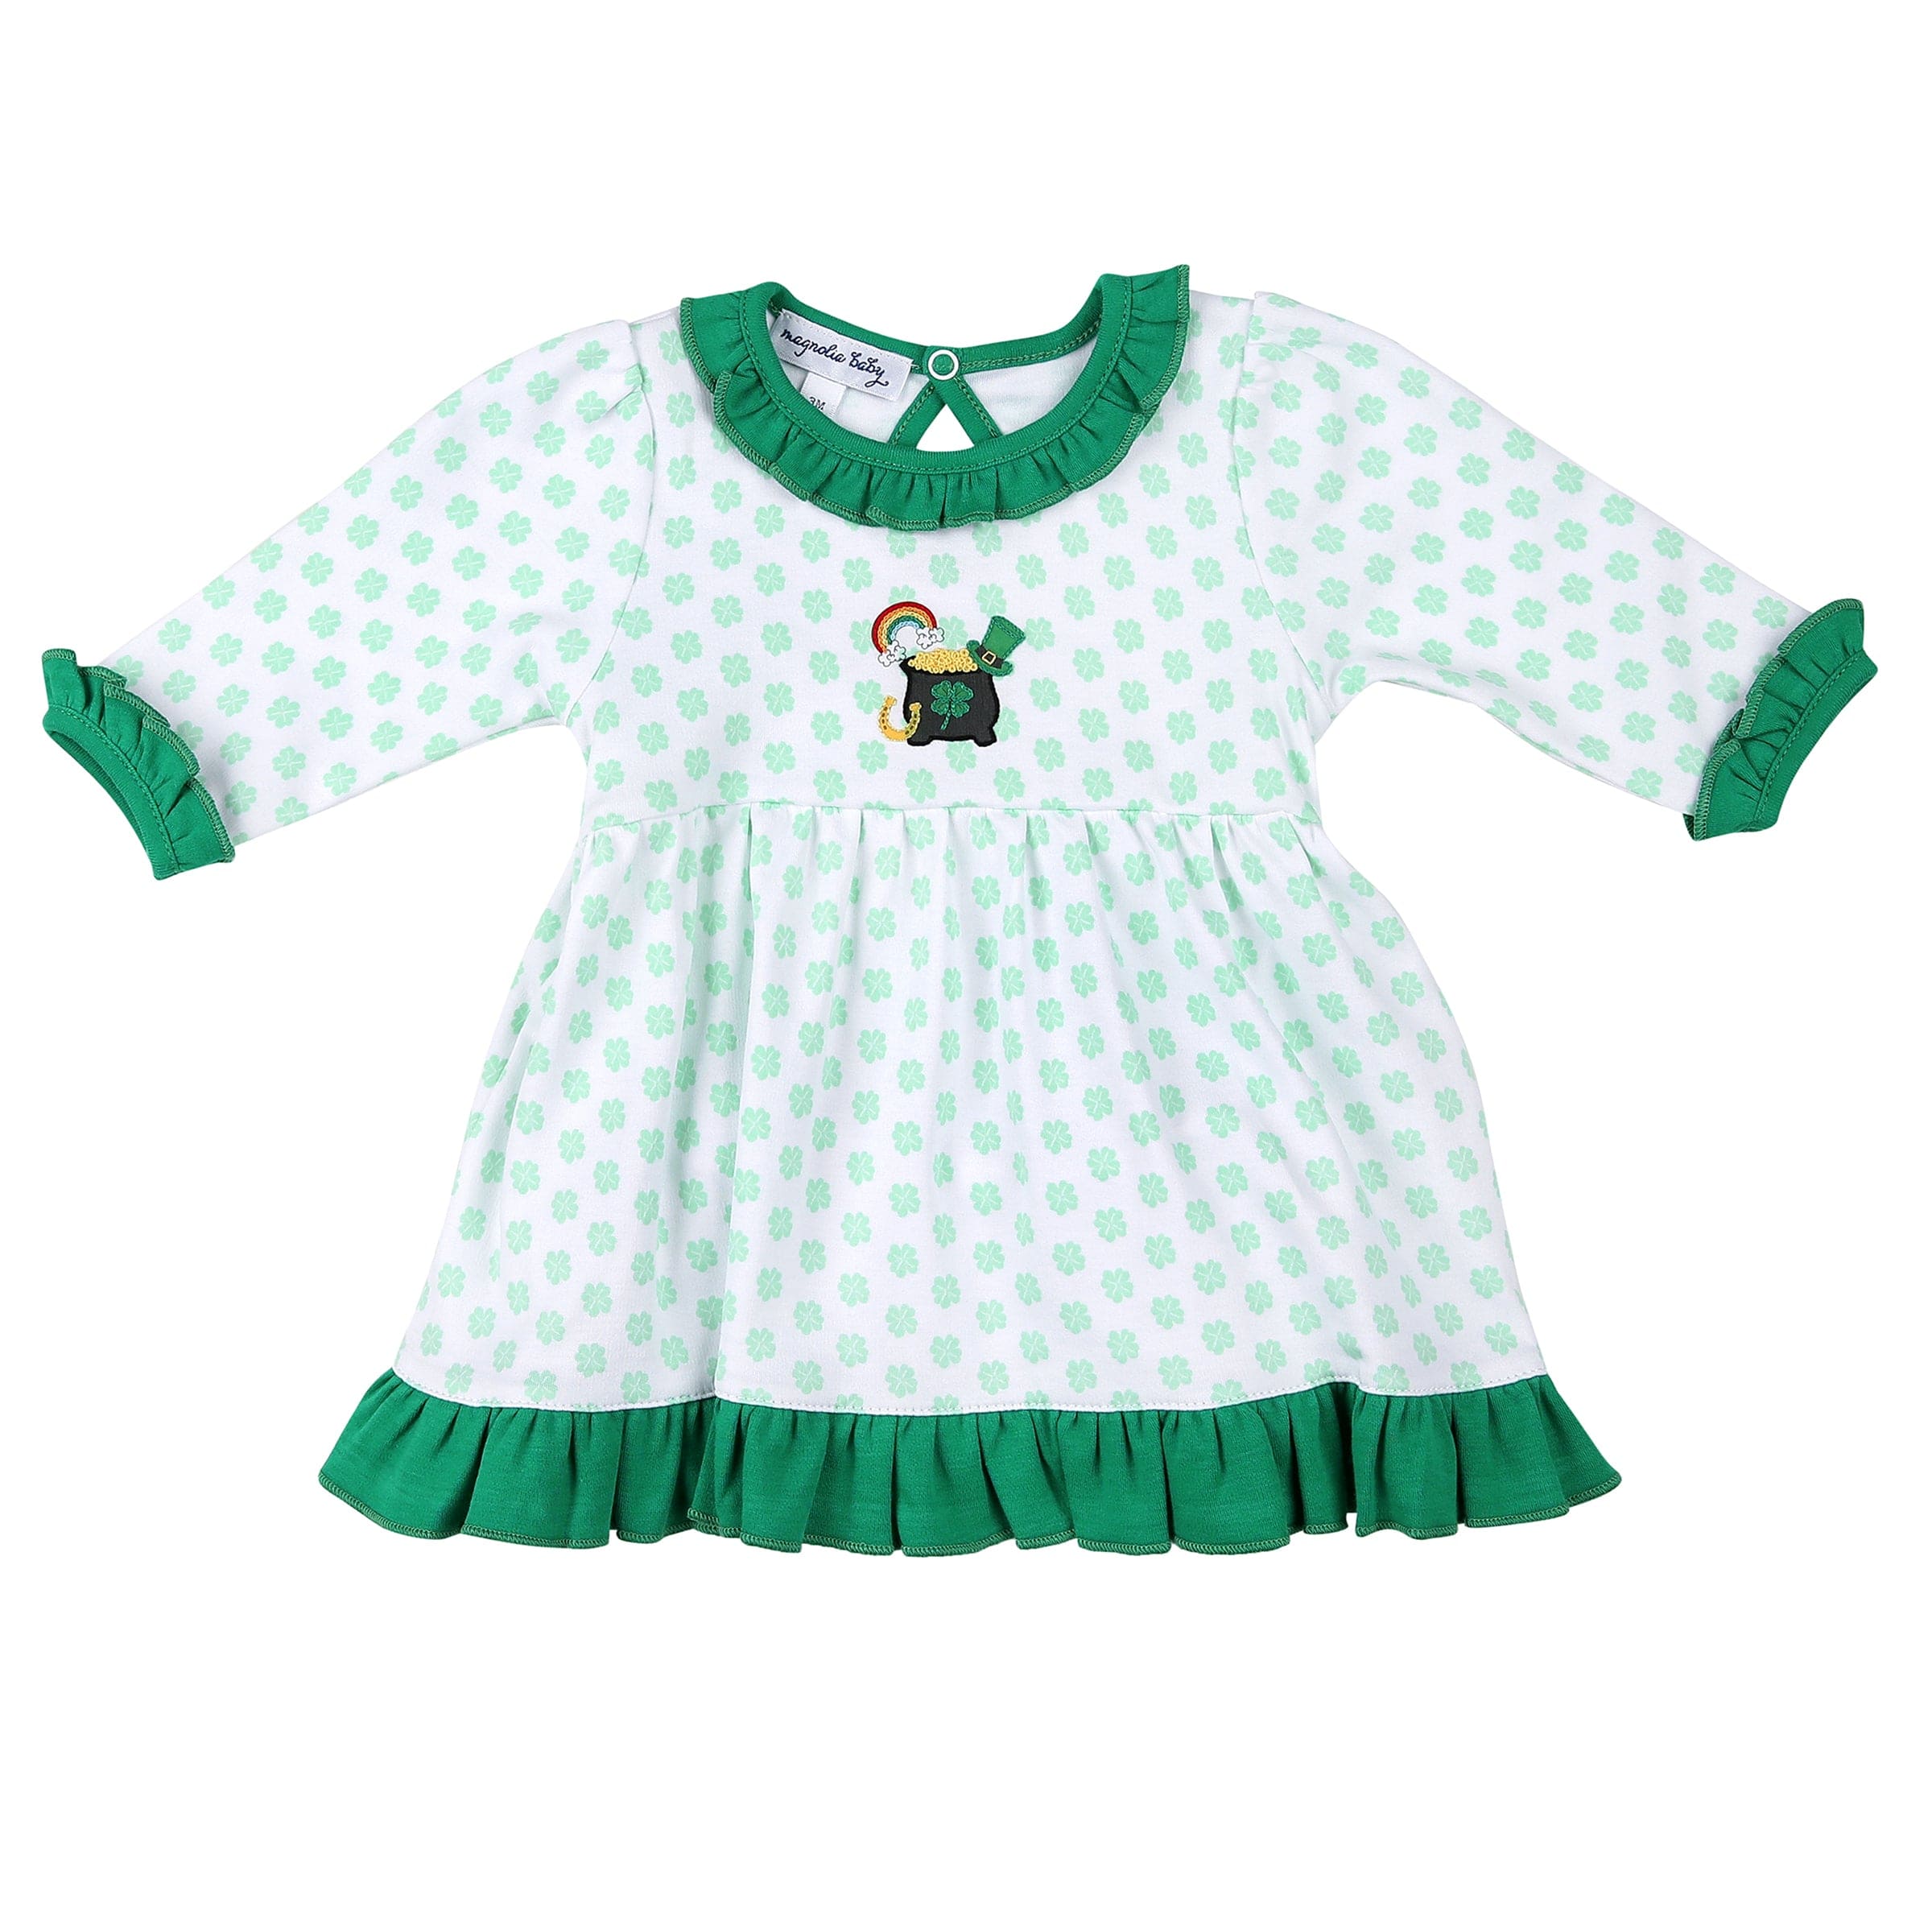 MAGNOLIA BABY - Shenanigans Embroidered Dress - Green